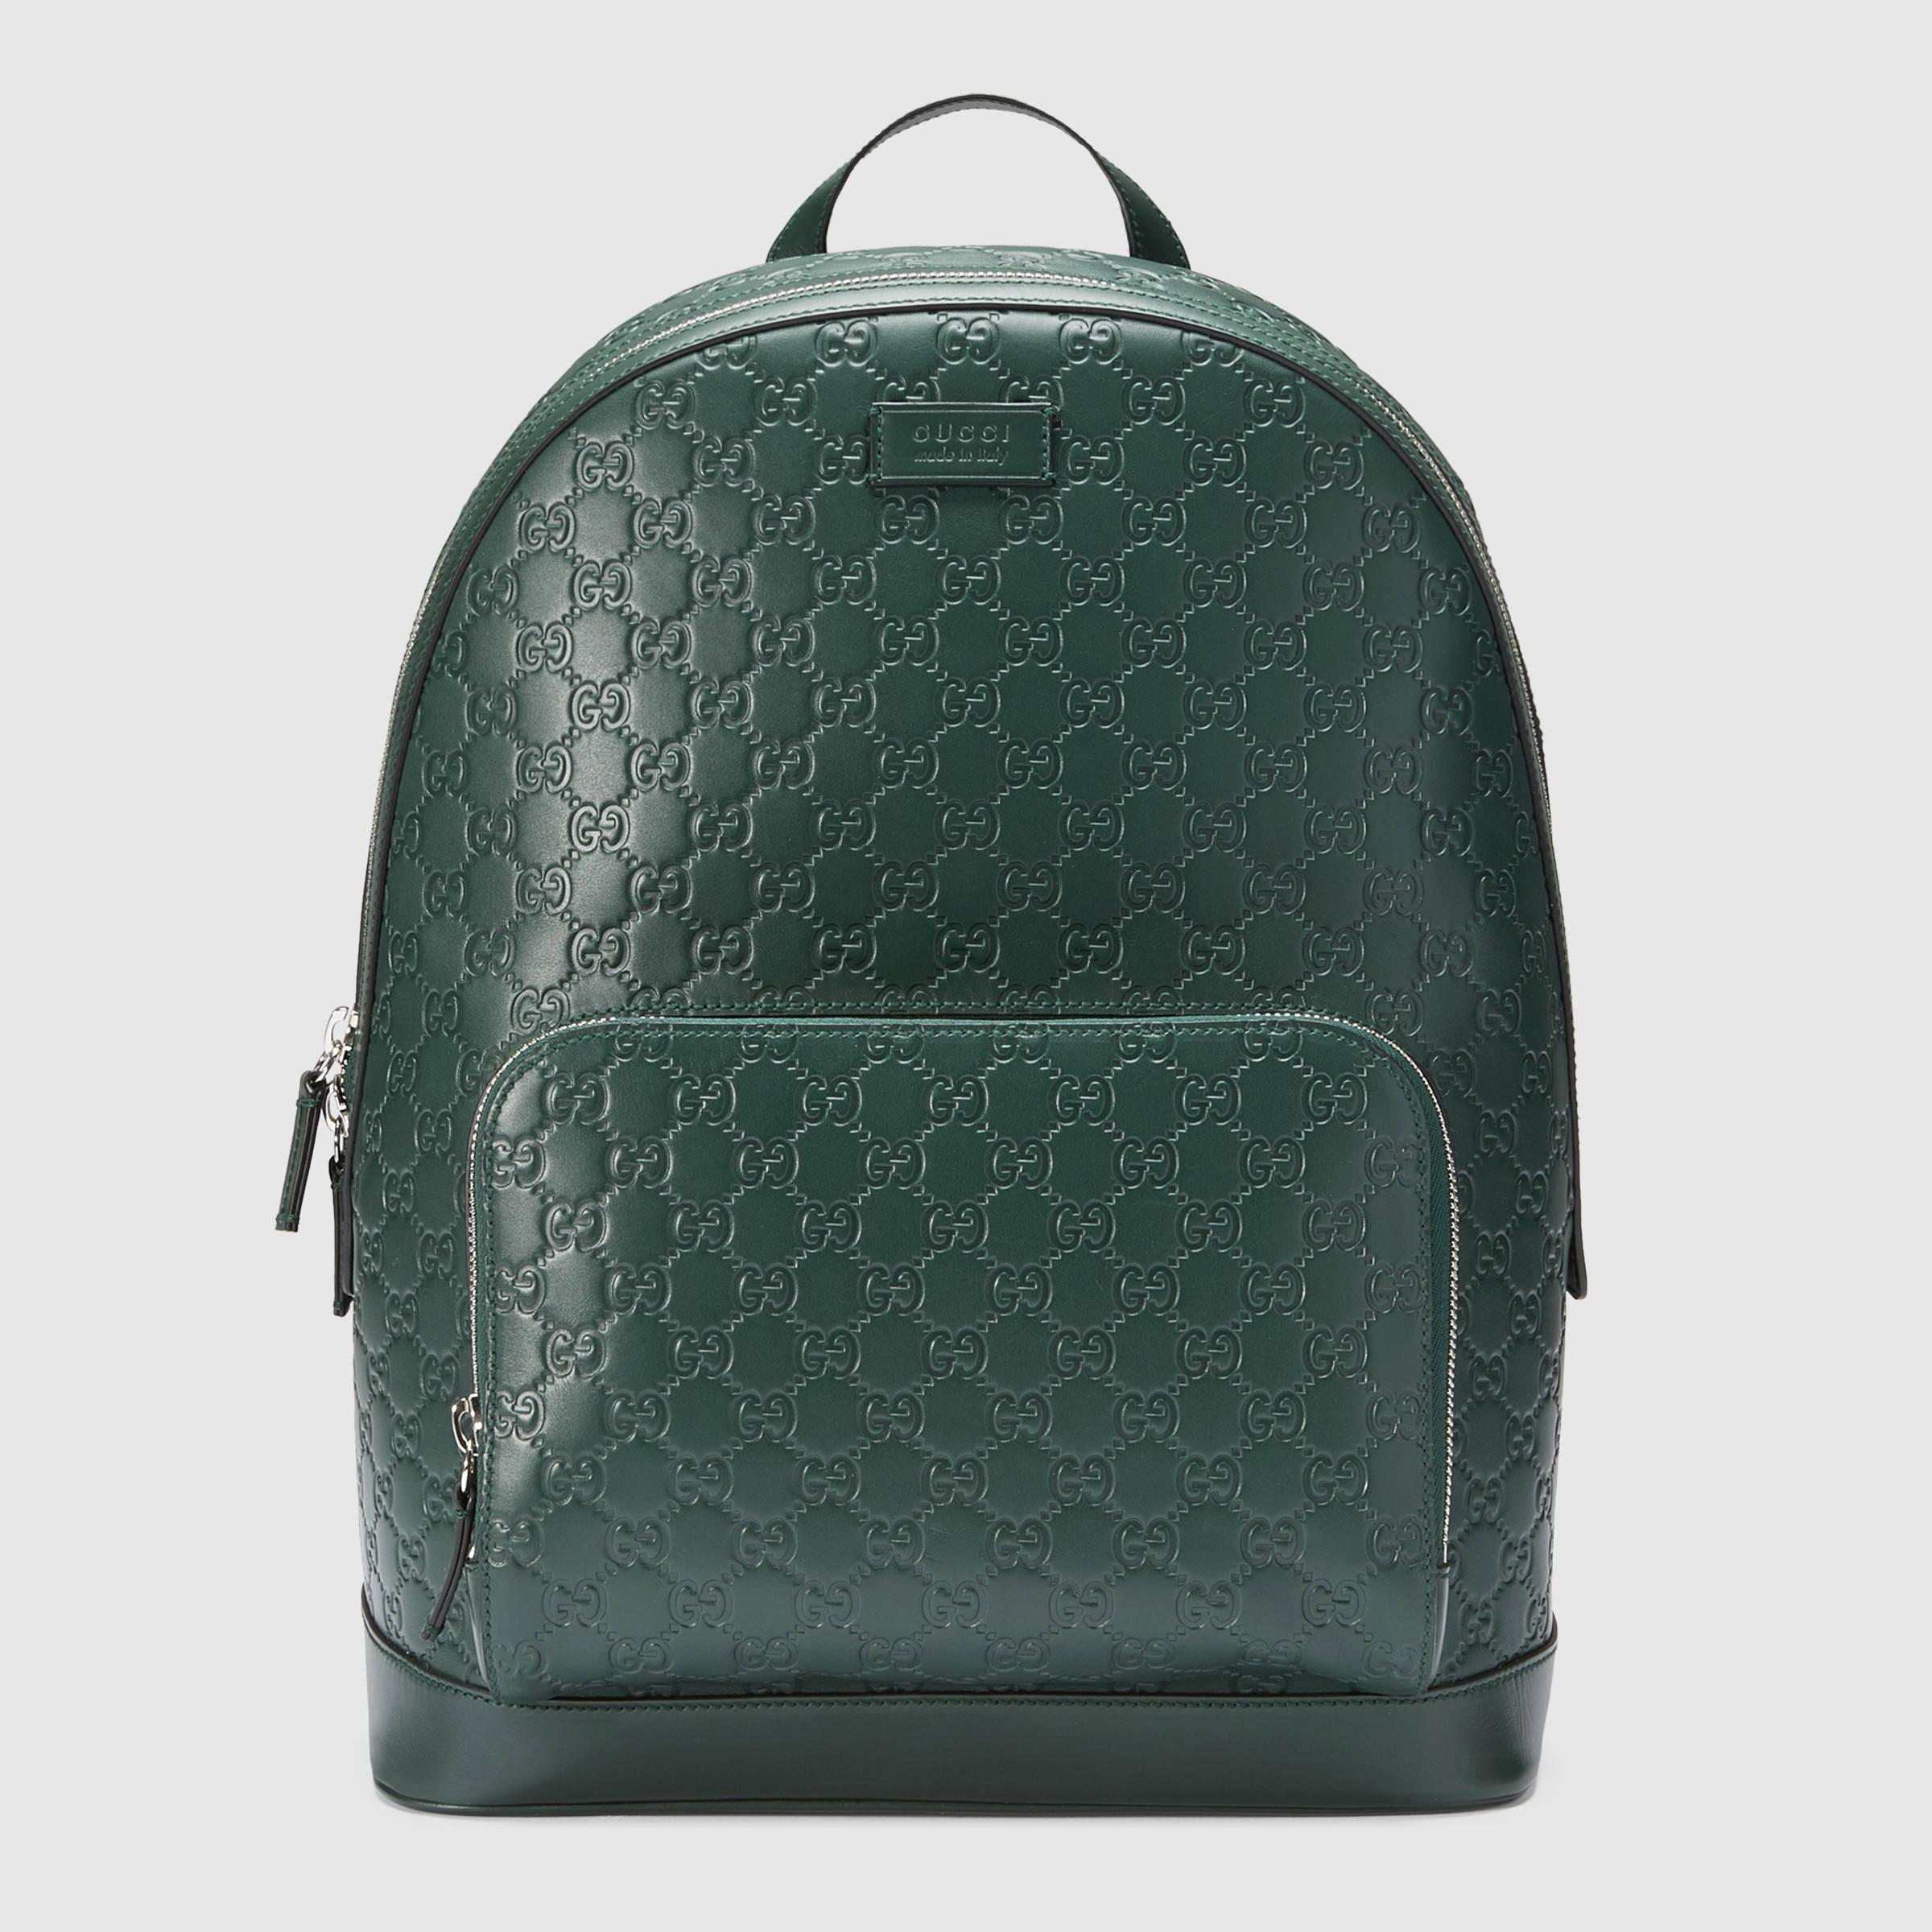 Gucci Signature Leather Backpack in Green | Lyst